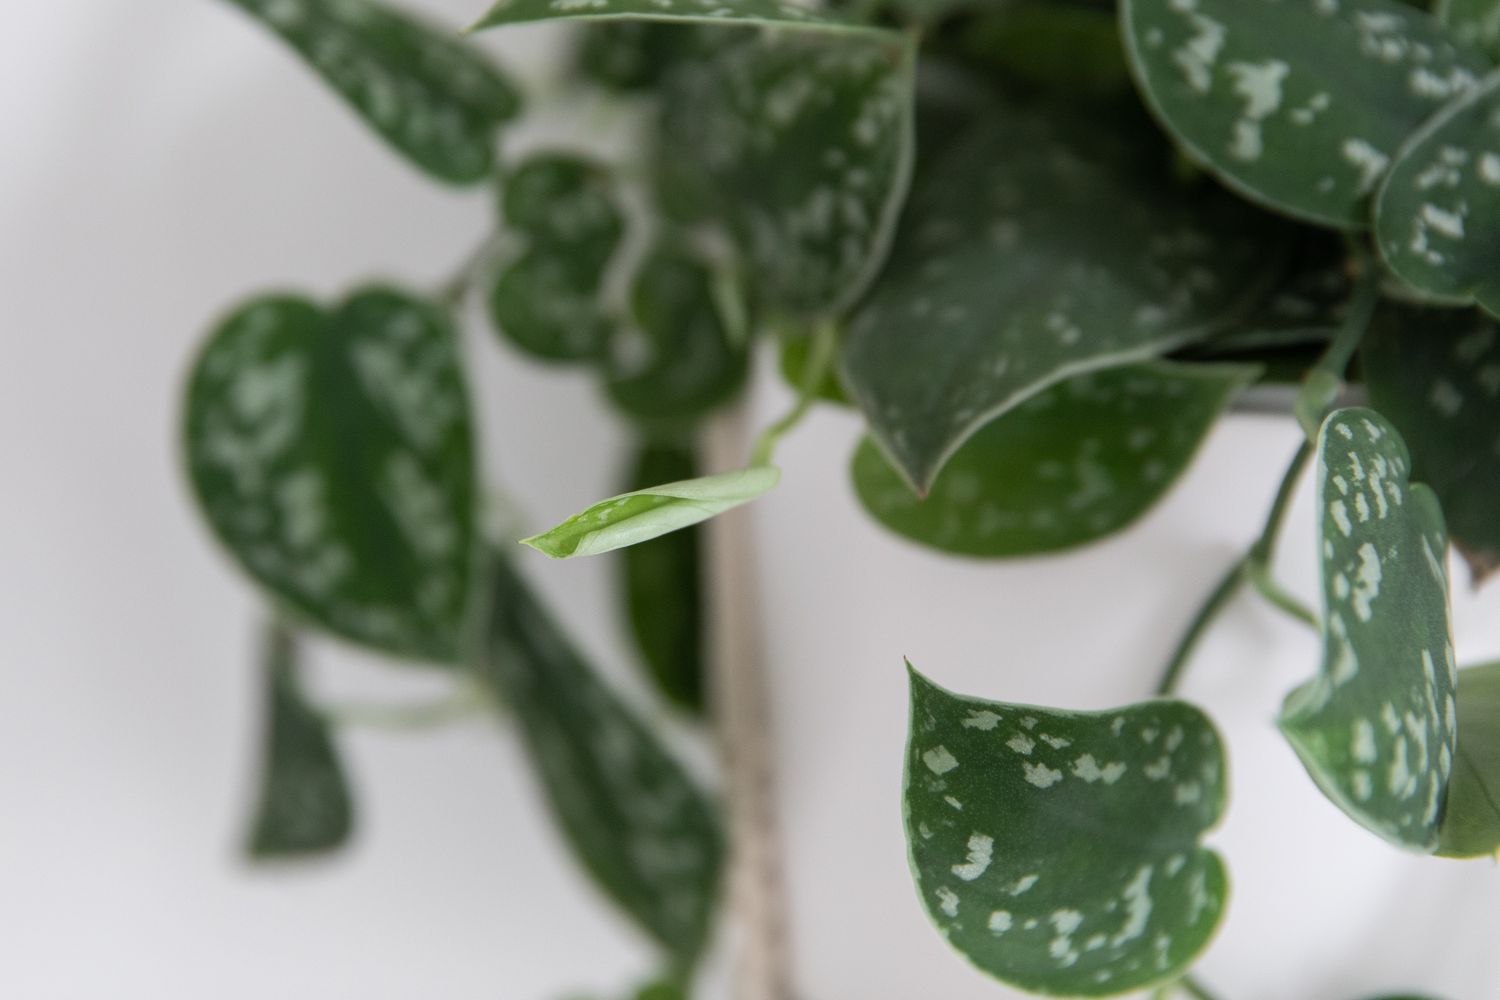 Satin pothos with spotted leaves and unfurling bud closeup